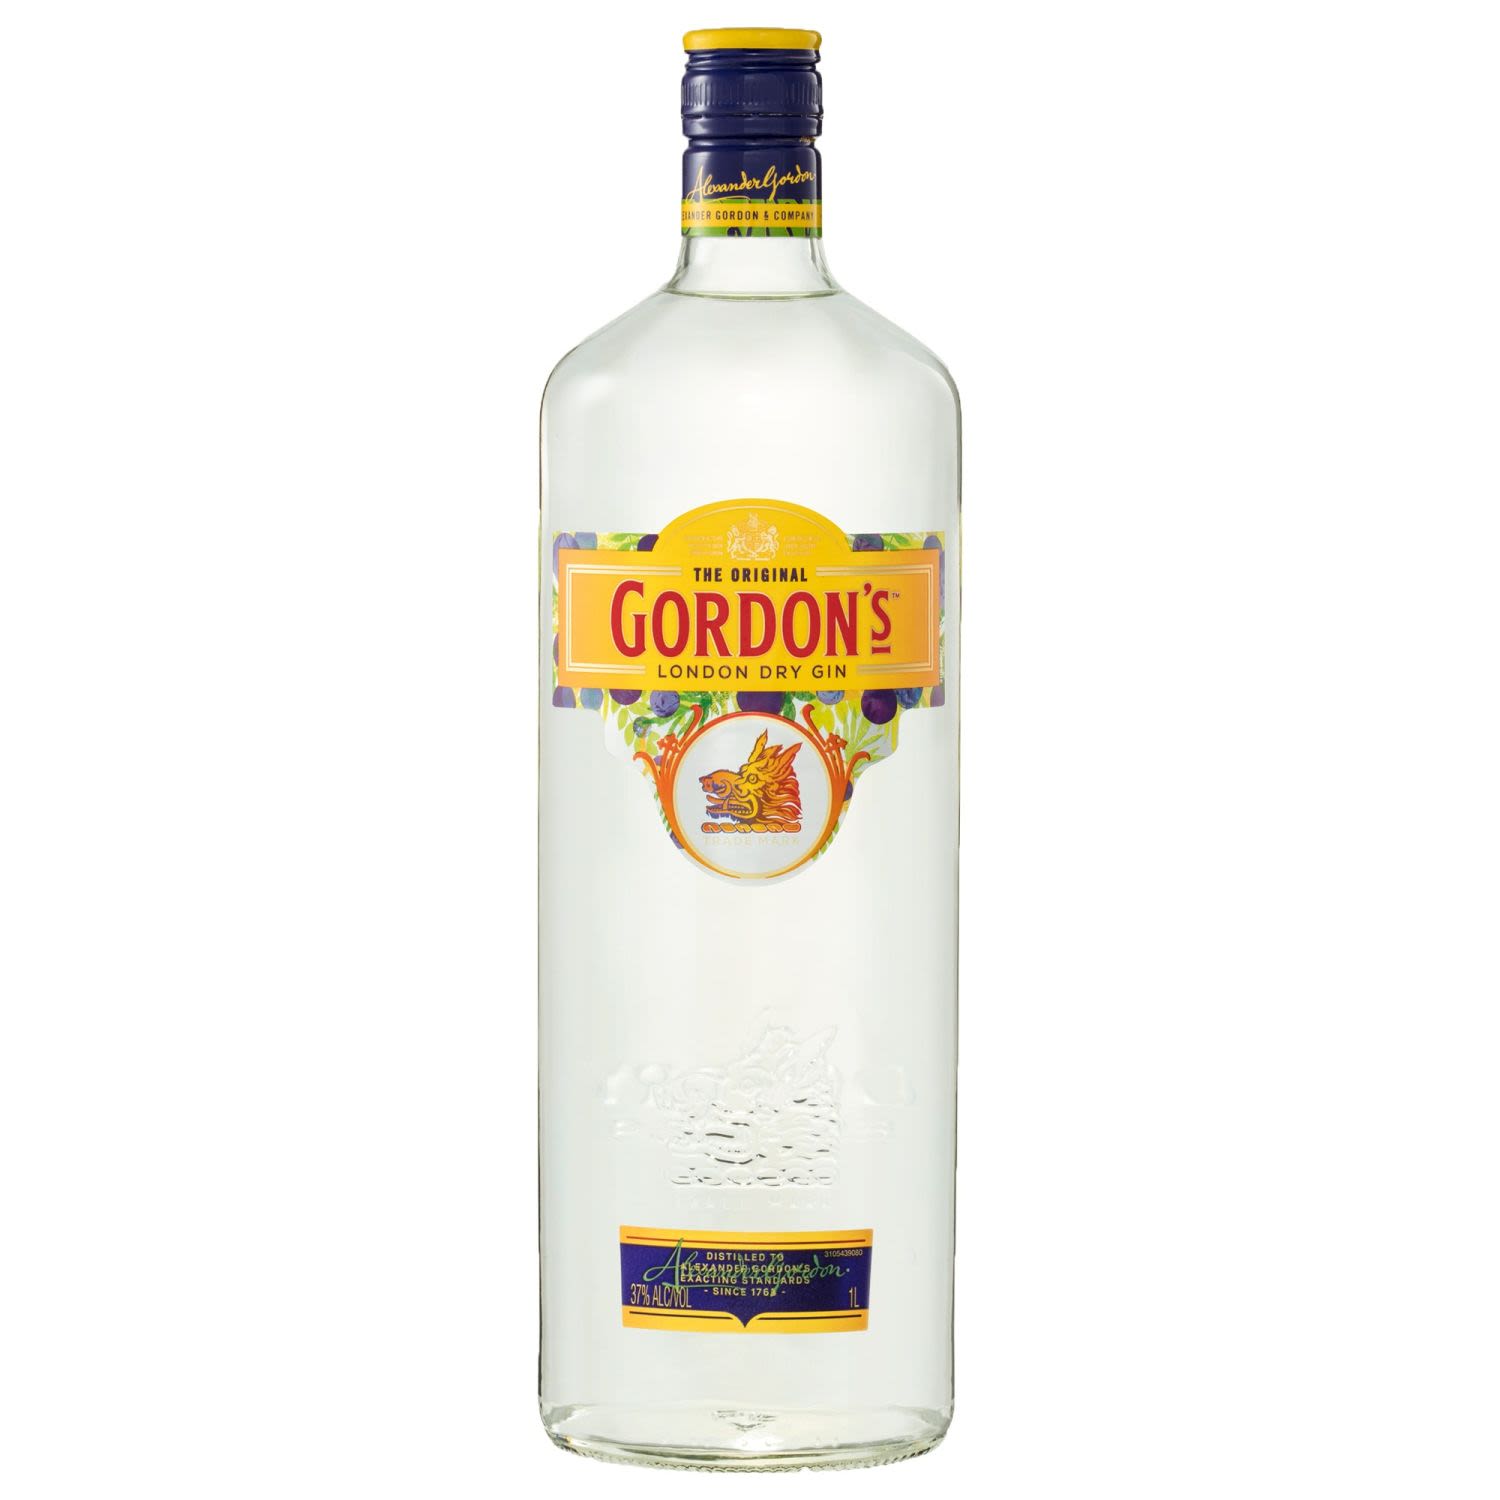 Founded by Alexander Gordon in 1769, the Gordon's recipe has remained almost untouched since its creation. Triple-distilled, the gin contains juniper berries, coriander seeds and angelica root to name a few. Enjoy in a classic Gin and Tonic.<br /> <br />Alcohol Volume: 37.00%<br /><br />Pack Format: Bottle<br /><br />Standard Drinks: 29<br /><br />Pack Type: Bottle<br /><br />Country of Origin: England<br />